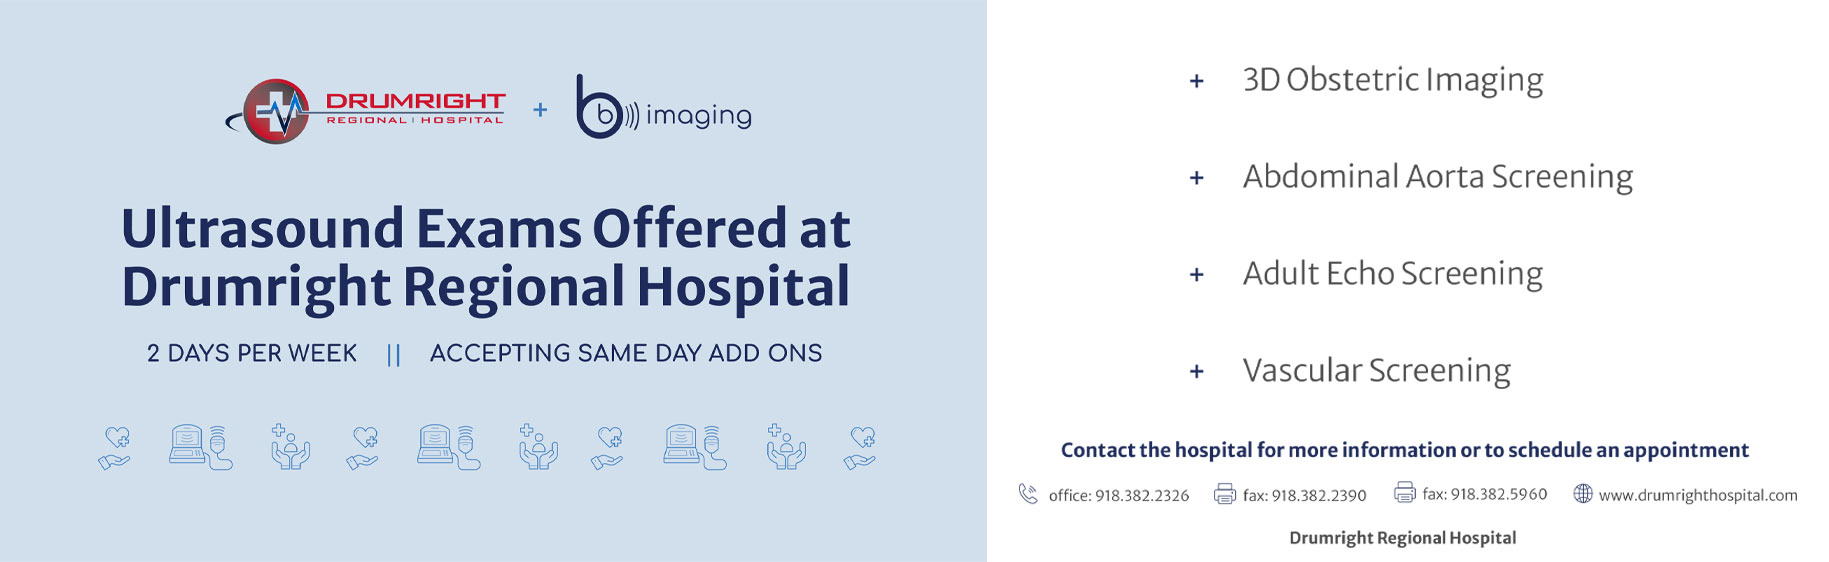 Ultrasound Exams Offered at Drumright Regional Hospital 
2 Days Per Week | Accepting Same Day Add Ons

* 3D Obstetric Imaging 
* Abdominal Aorta Screening 
* Adult Echo Screening 
* Vascular Screening